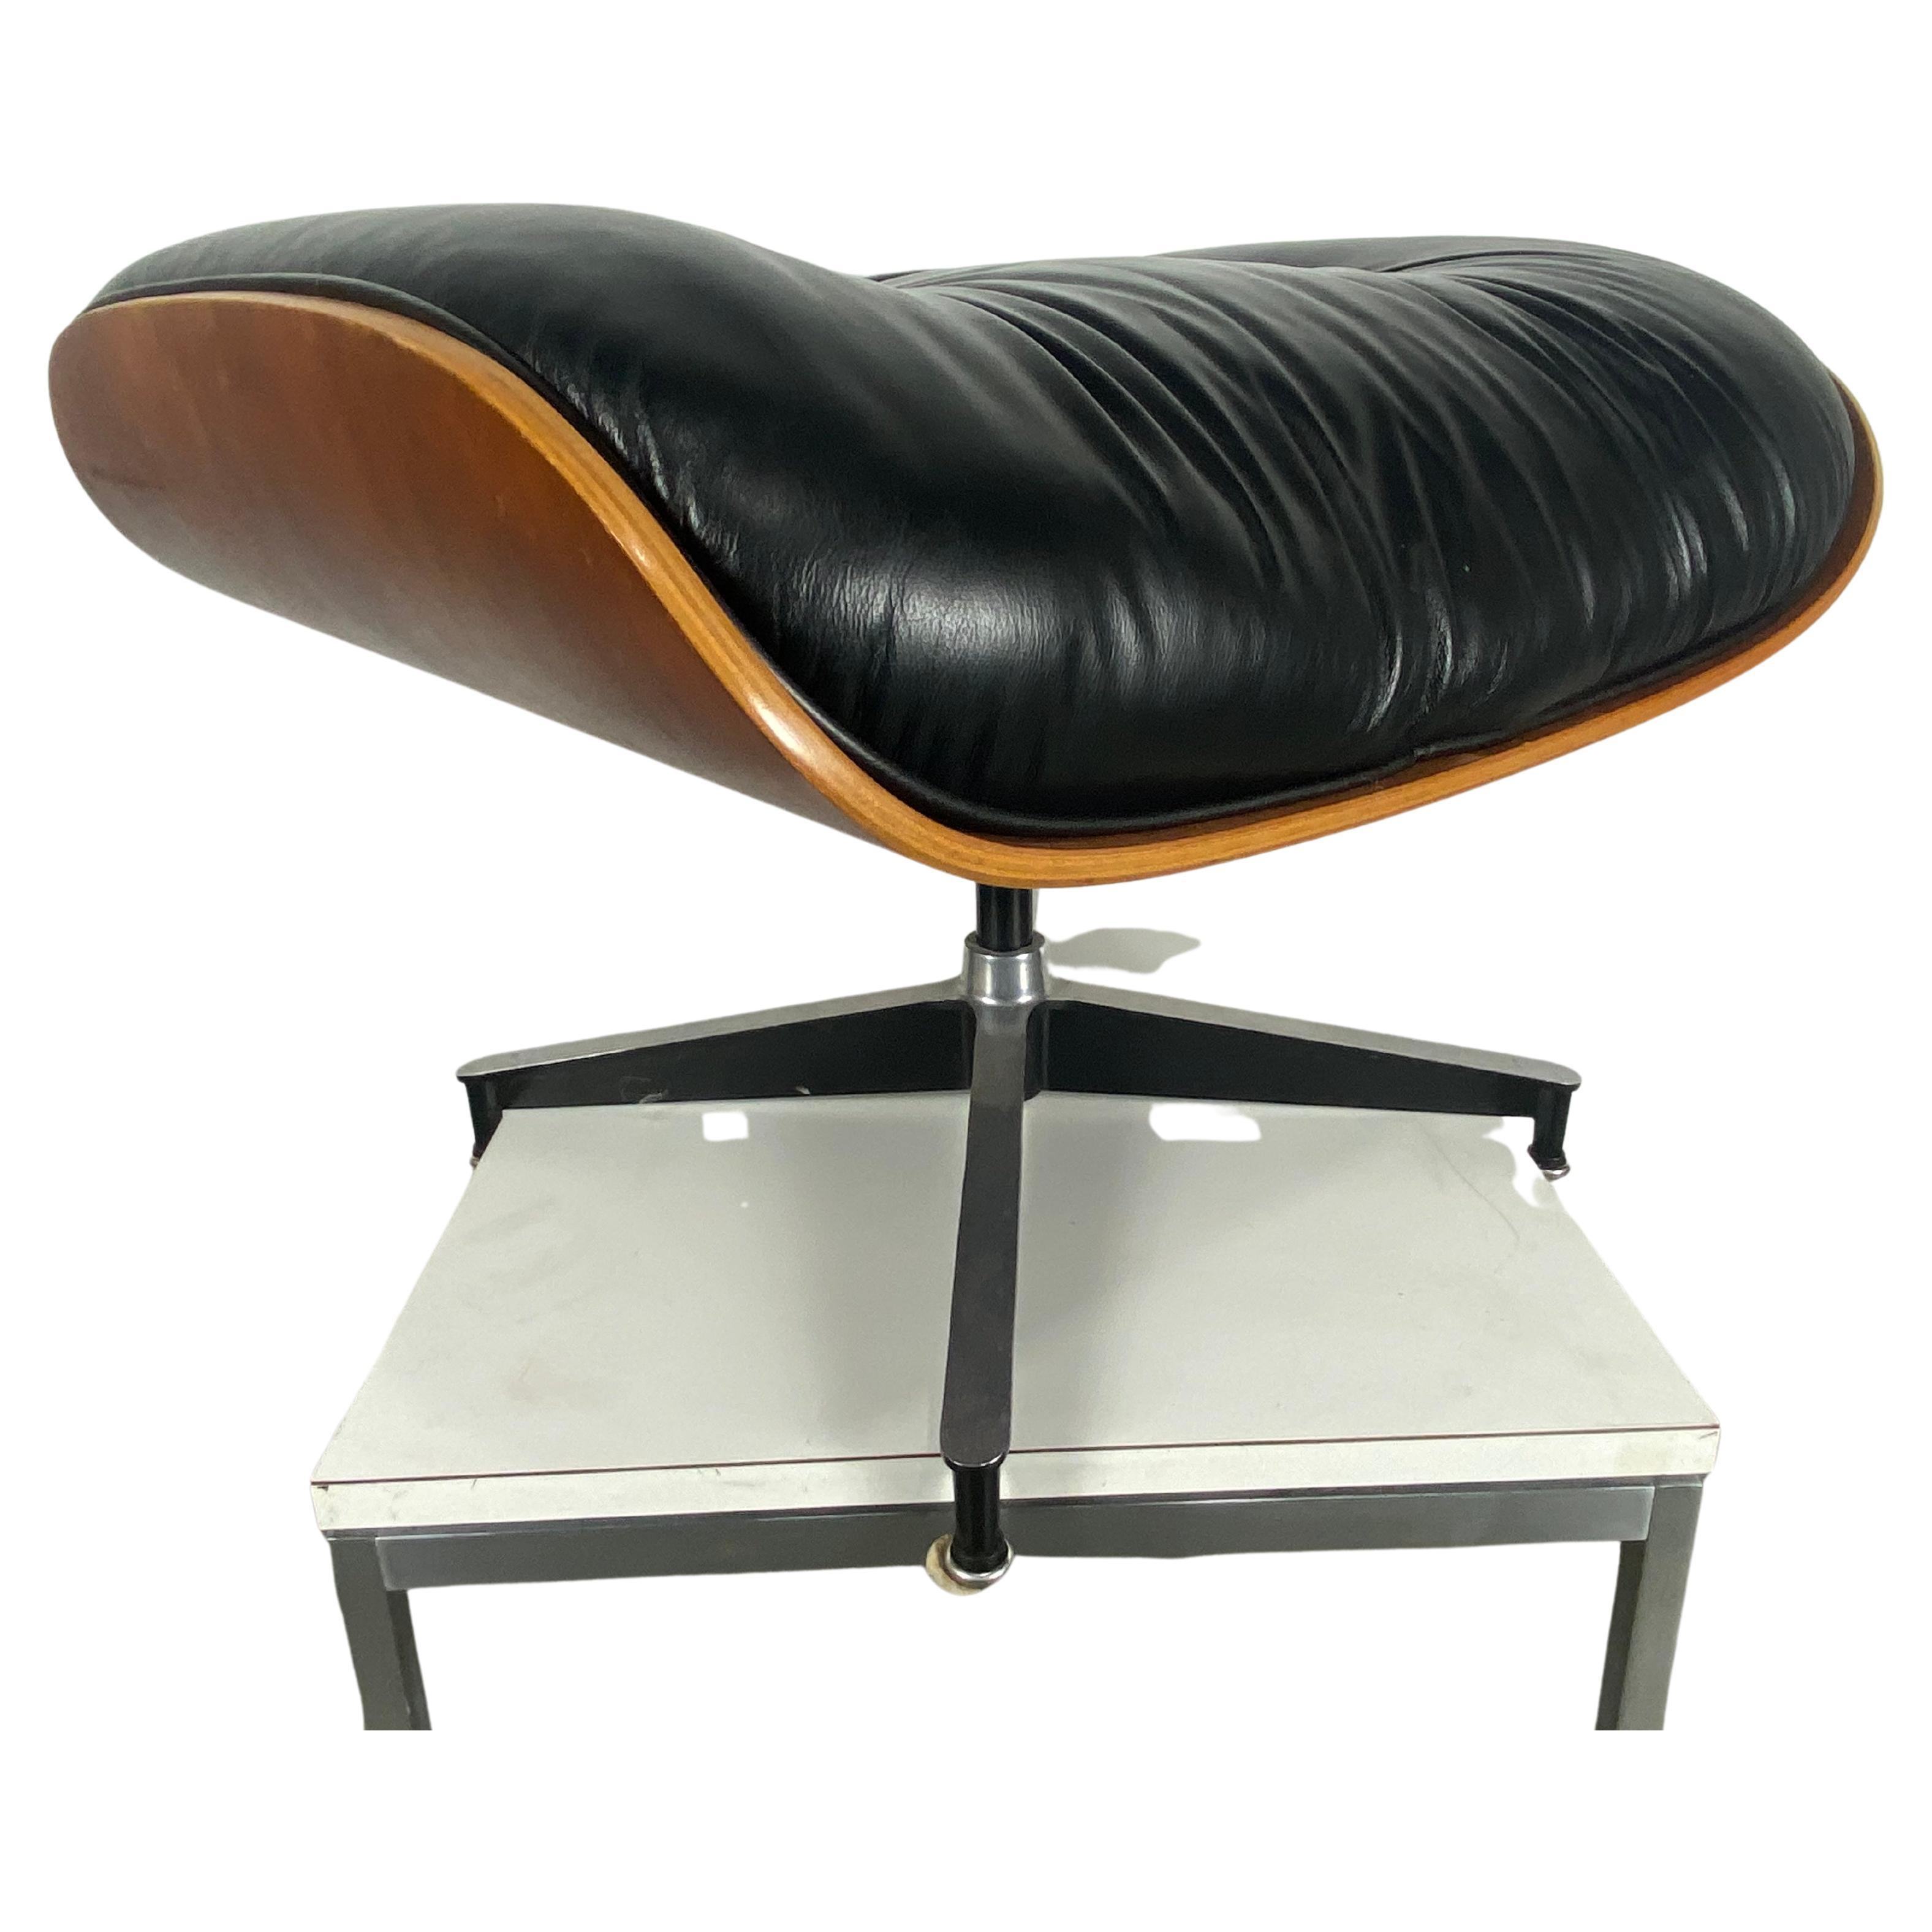 Charles & Ray Eames black leather and wood ottoman for lounge chair, Herman Miller, circa 1970s
Manufacturer label underneath. Black base with white glides. Cushion filled with feathers.
Original vintage very nice condition.